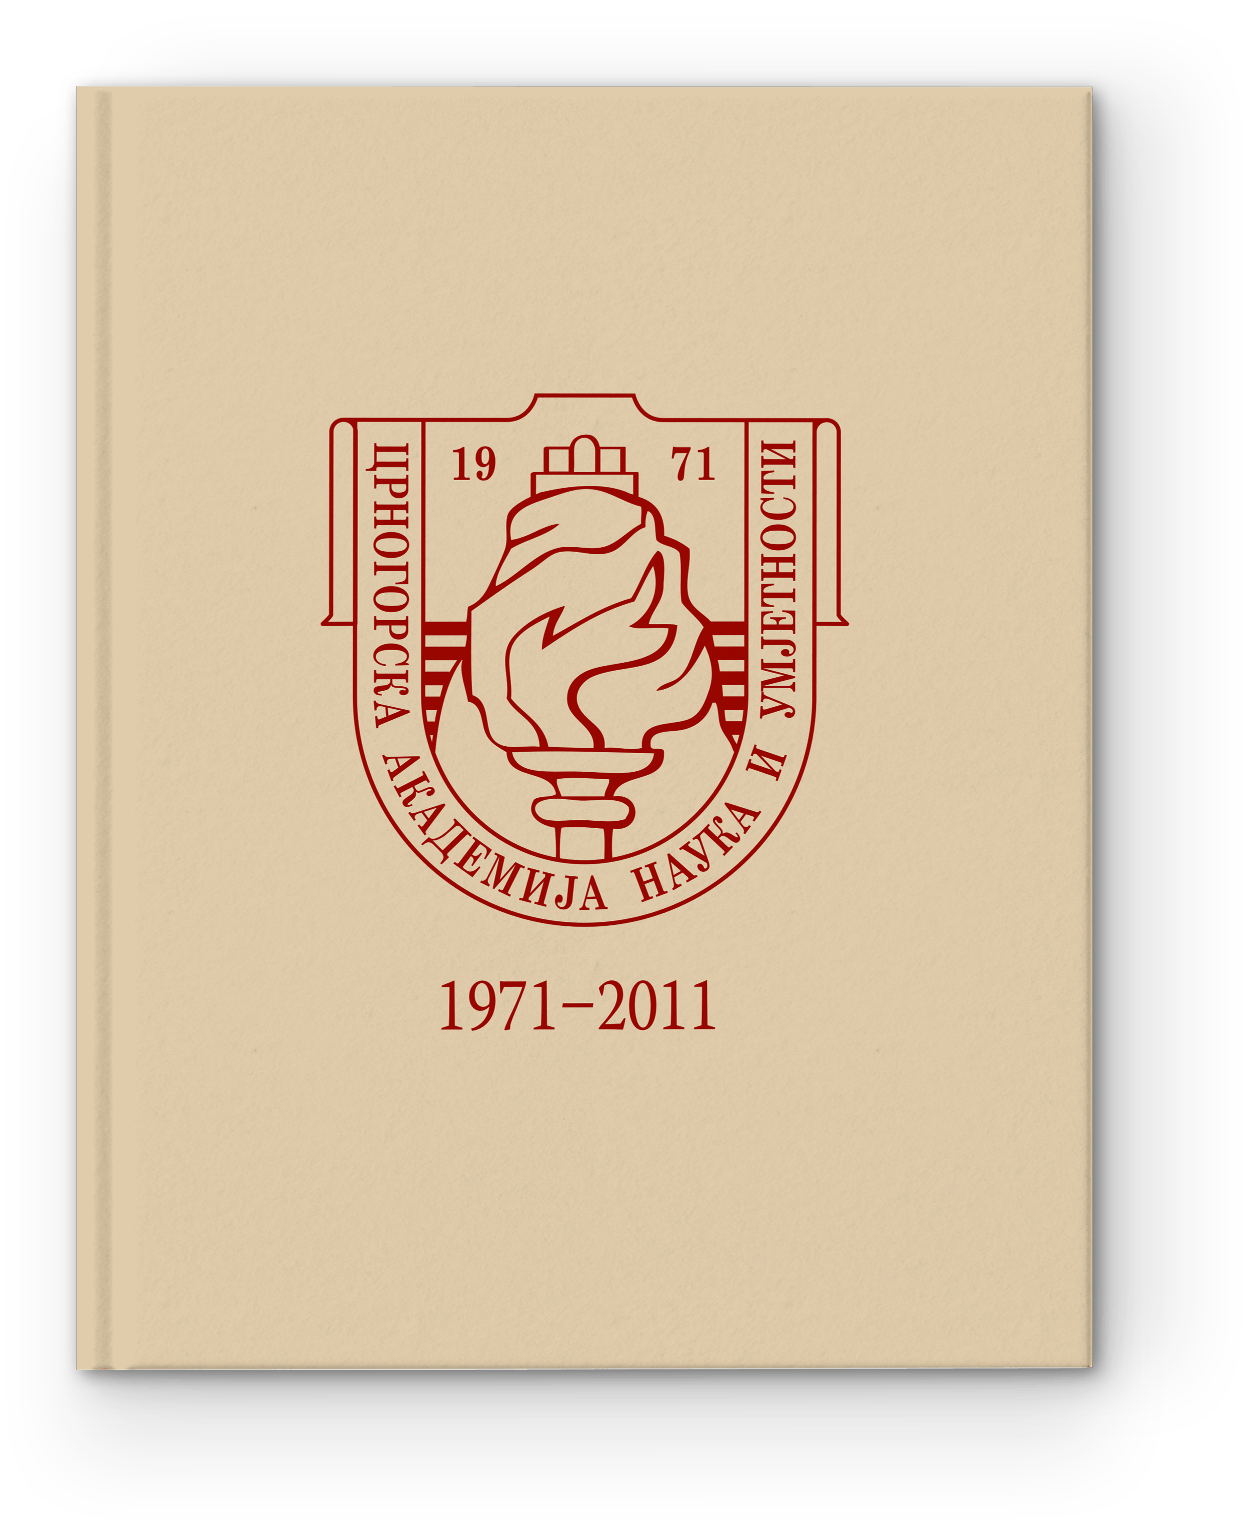 Montenegrin Academy of Sciences and Arts 1971–2011